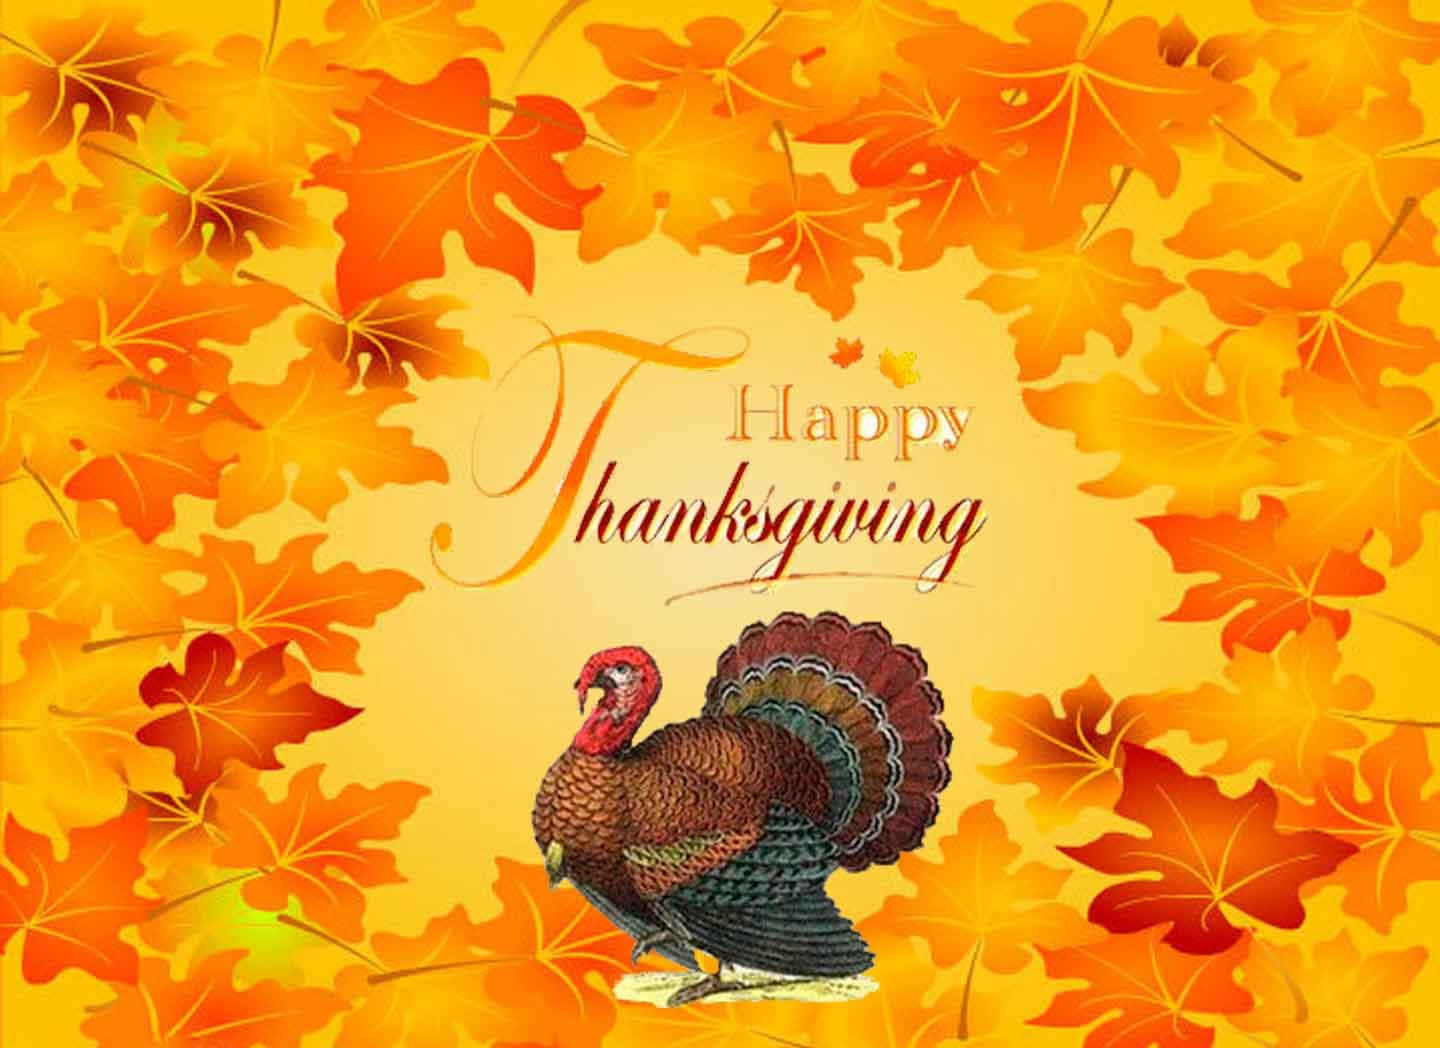 Wishing you peace, joy and a Happy Thanksgiving Wallpaper